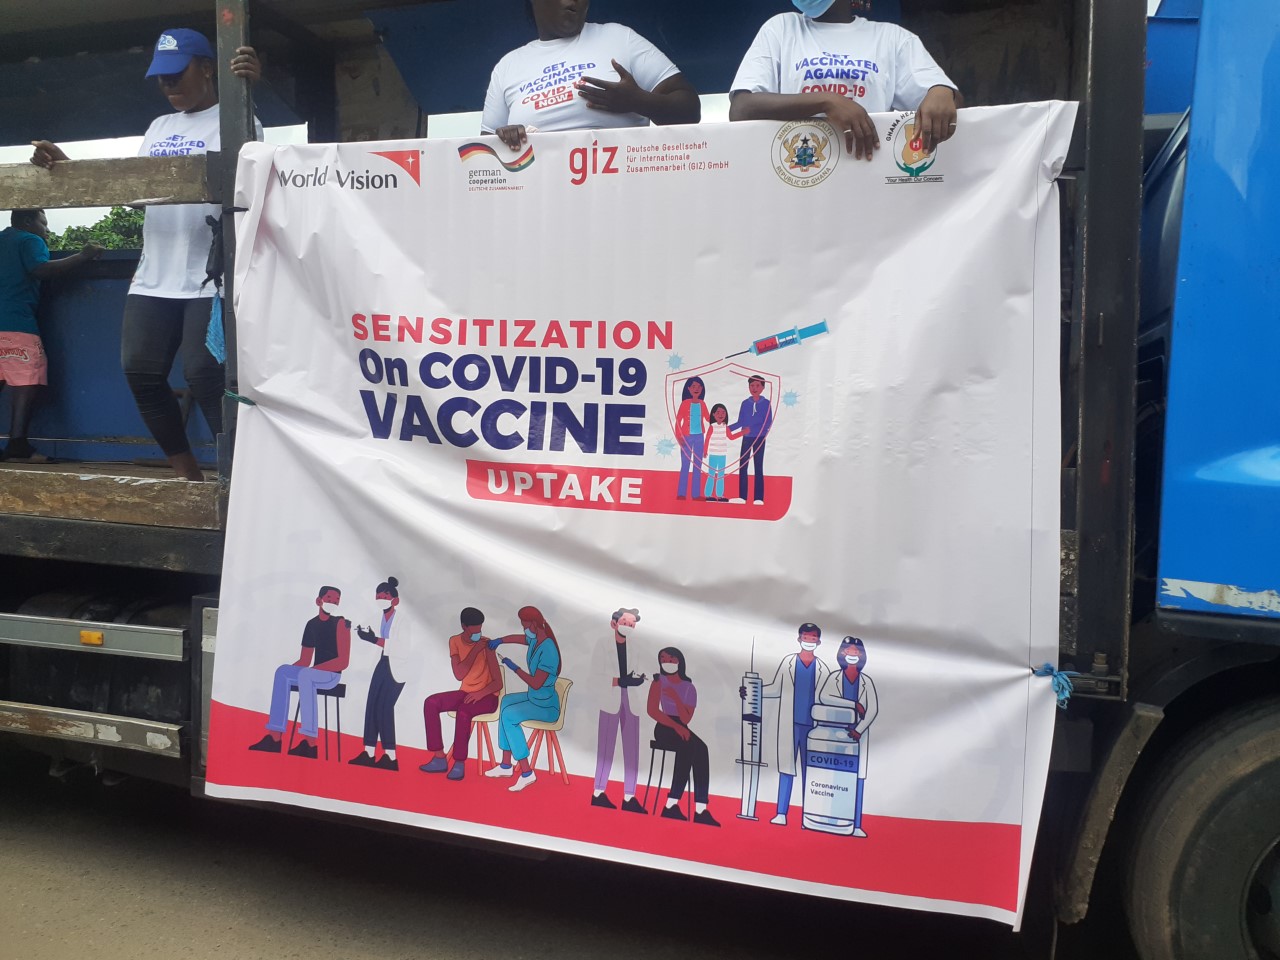 Ghana’s inability to achieve COVID-19 vaccination target unfortunate – World Vision